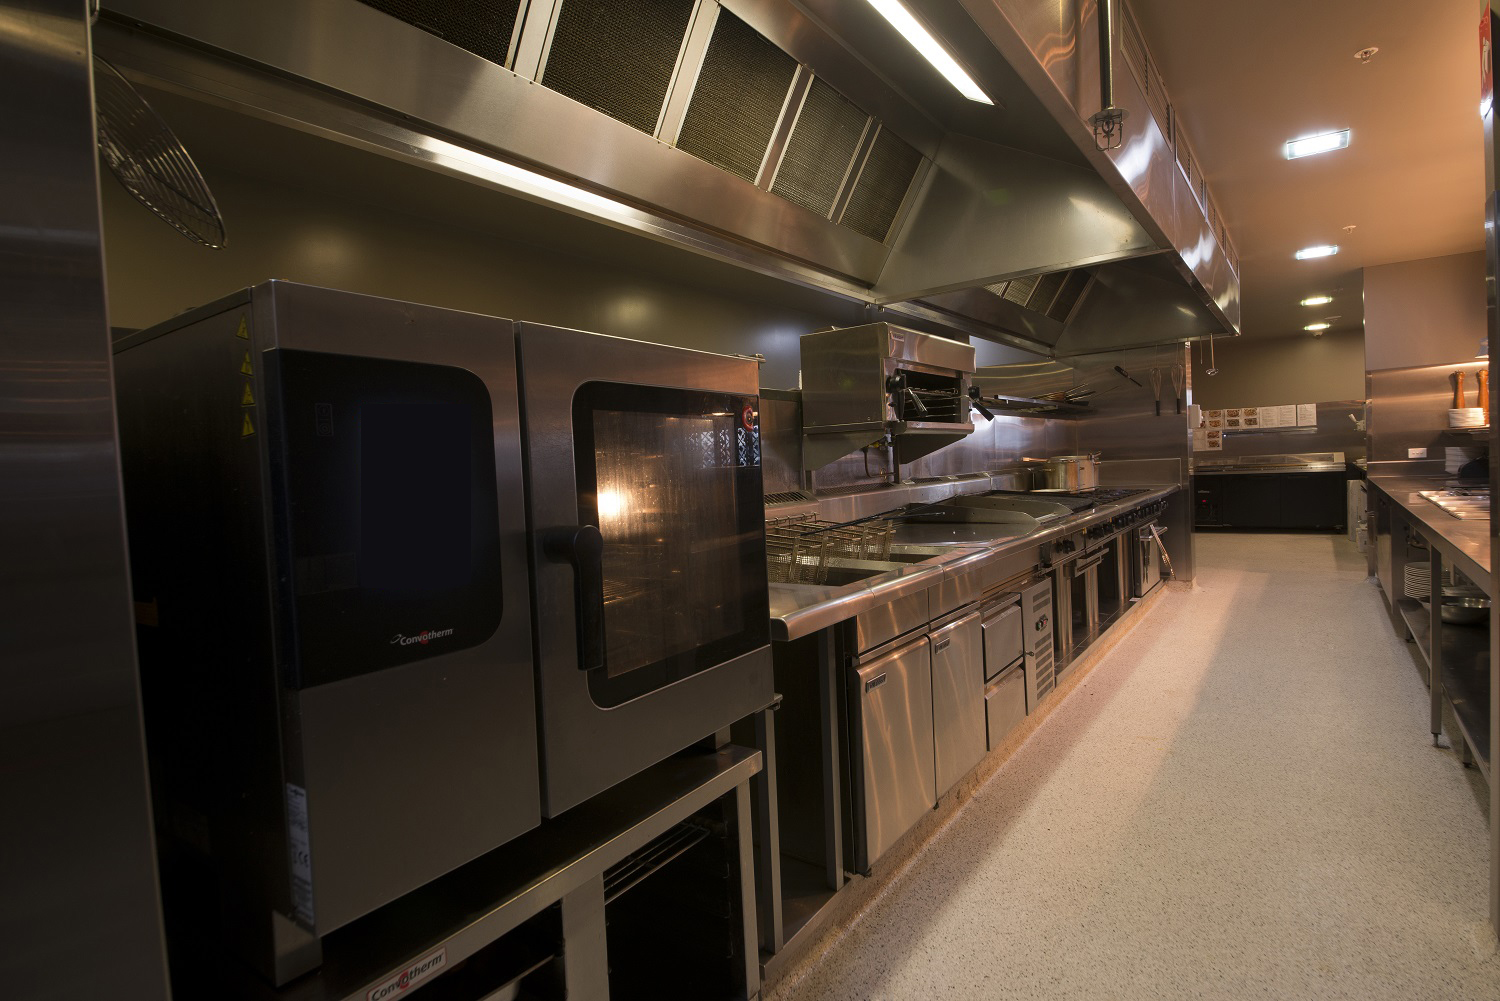 Active Commercial Kitchens Equipment And Fit Outs Commercial Kitchen Equipment And Fitouts